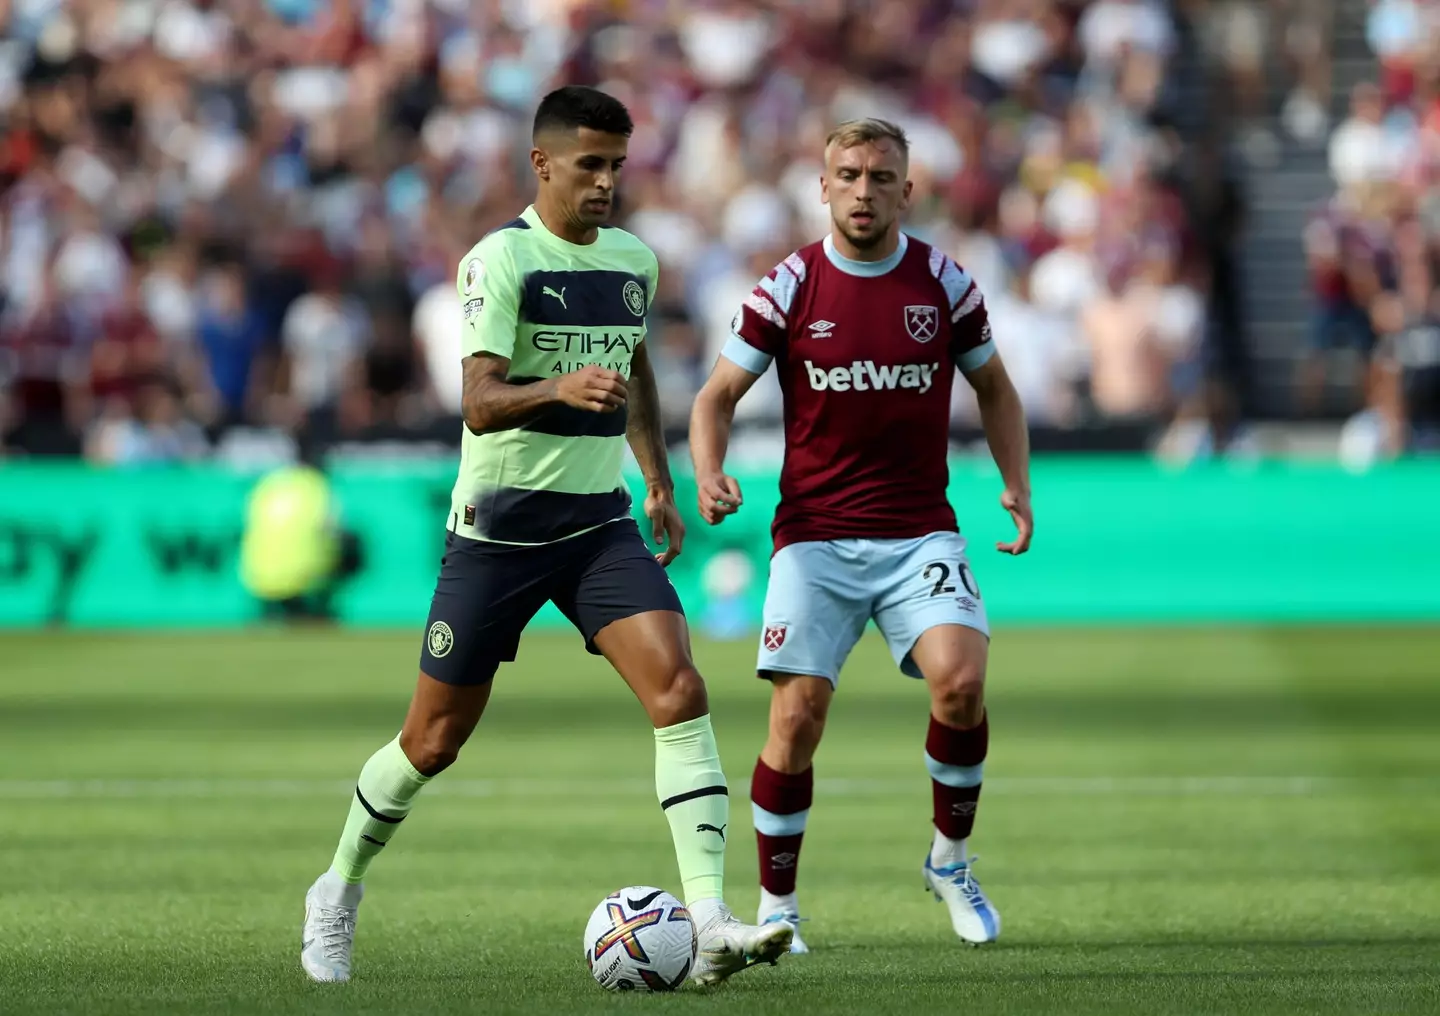 Joao Cancelo moves forward with the ball for Manchester City against West Ham. (PA Images / Alamy)